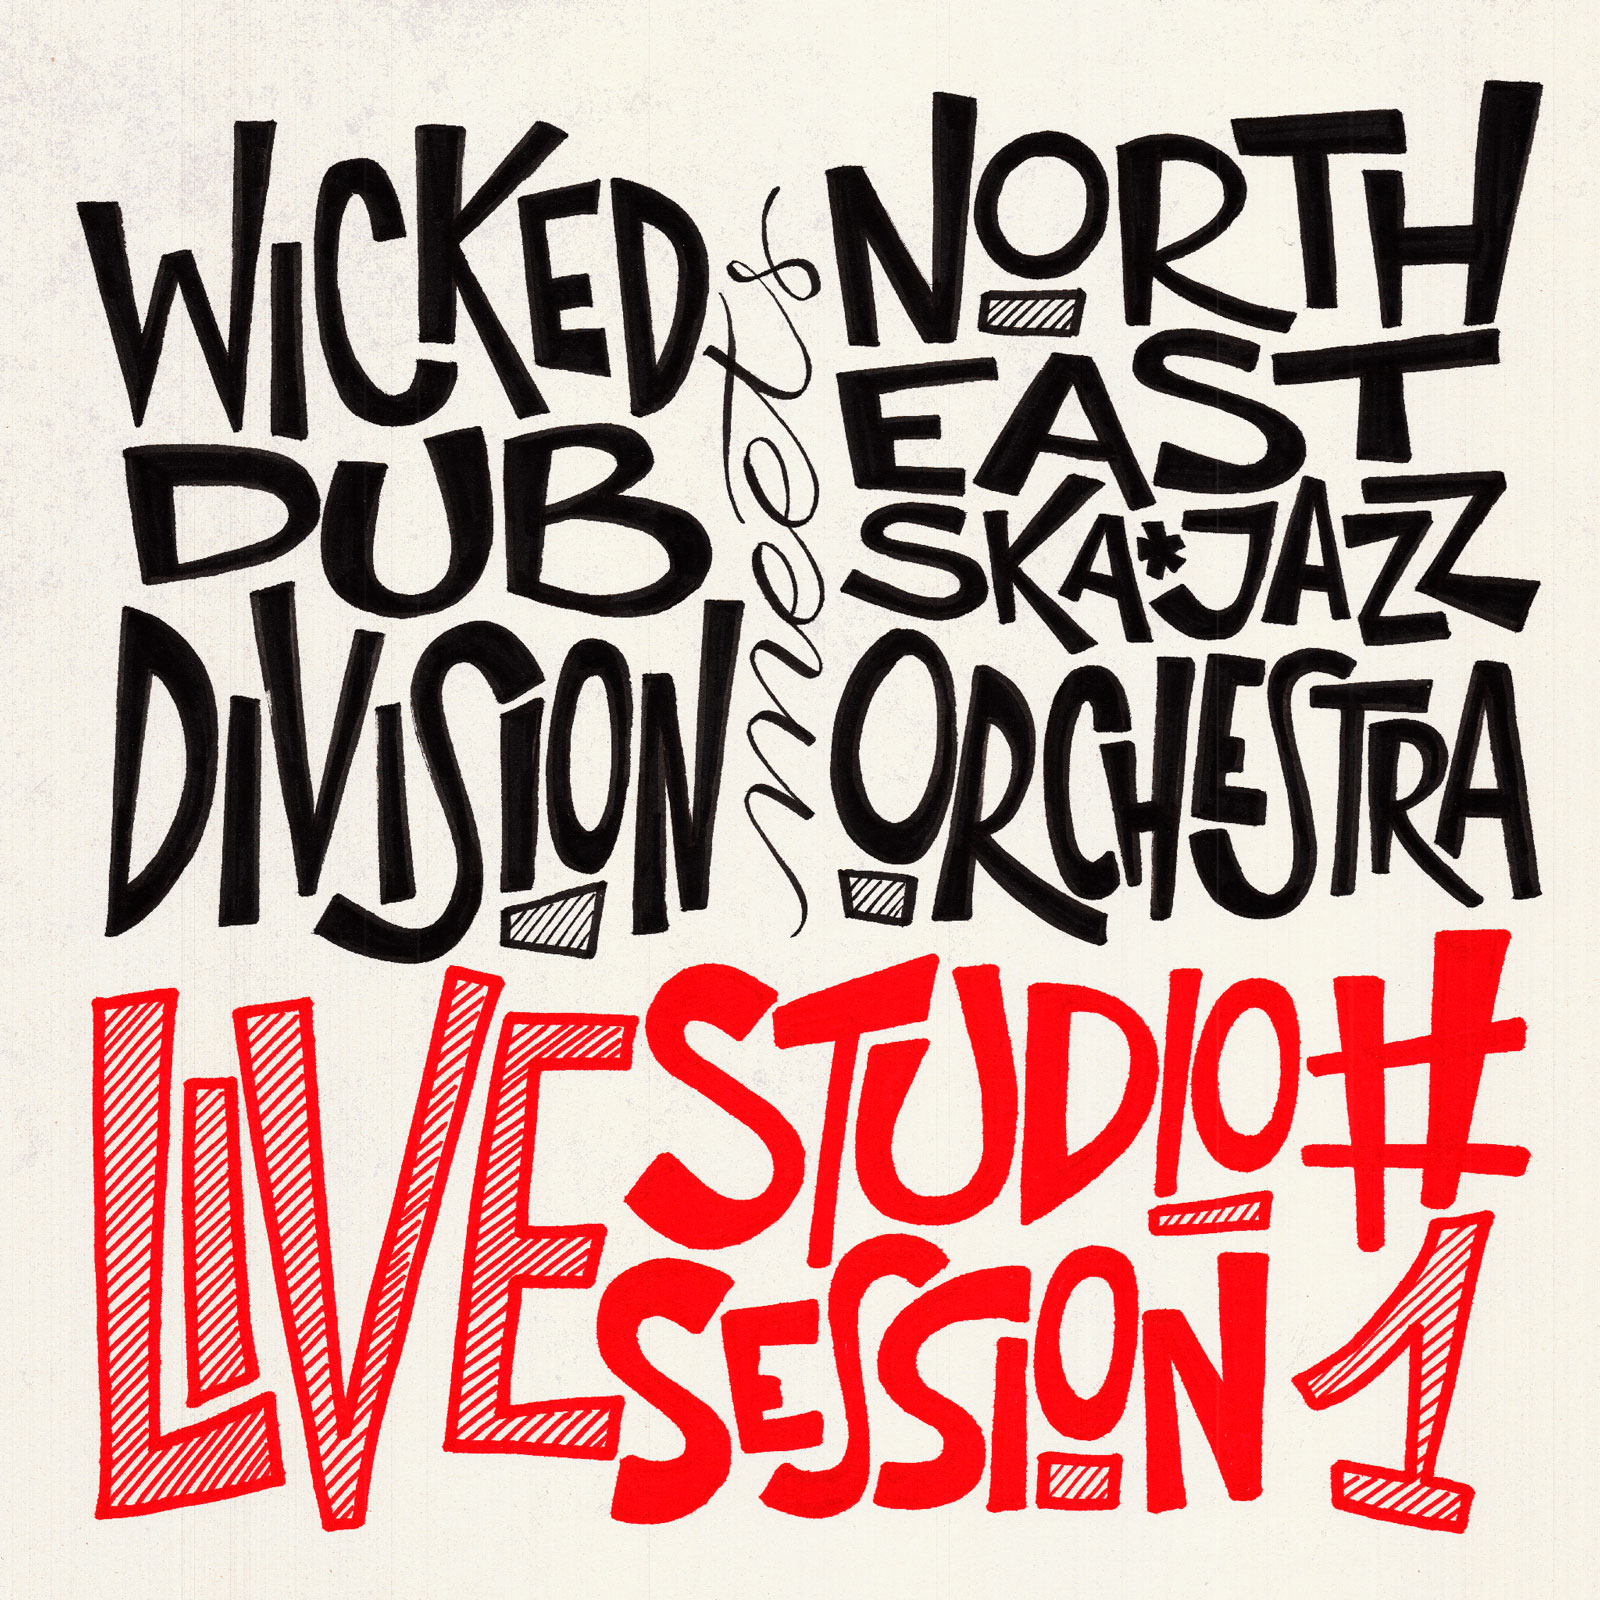 Wicked Dub Division meets North East Ska Jazz Orchestra: Live Studio Session #1